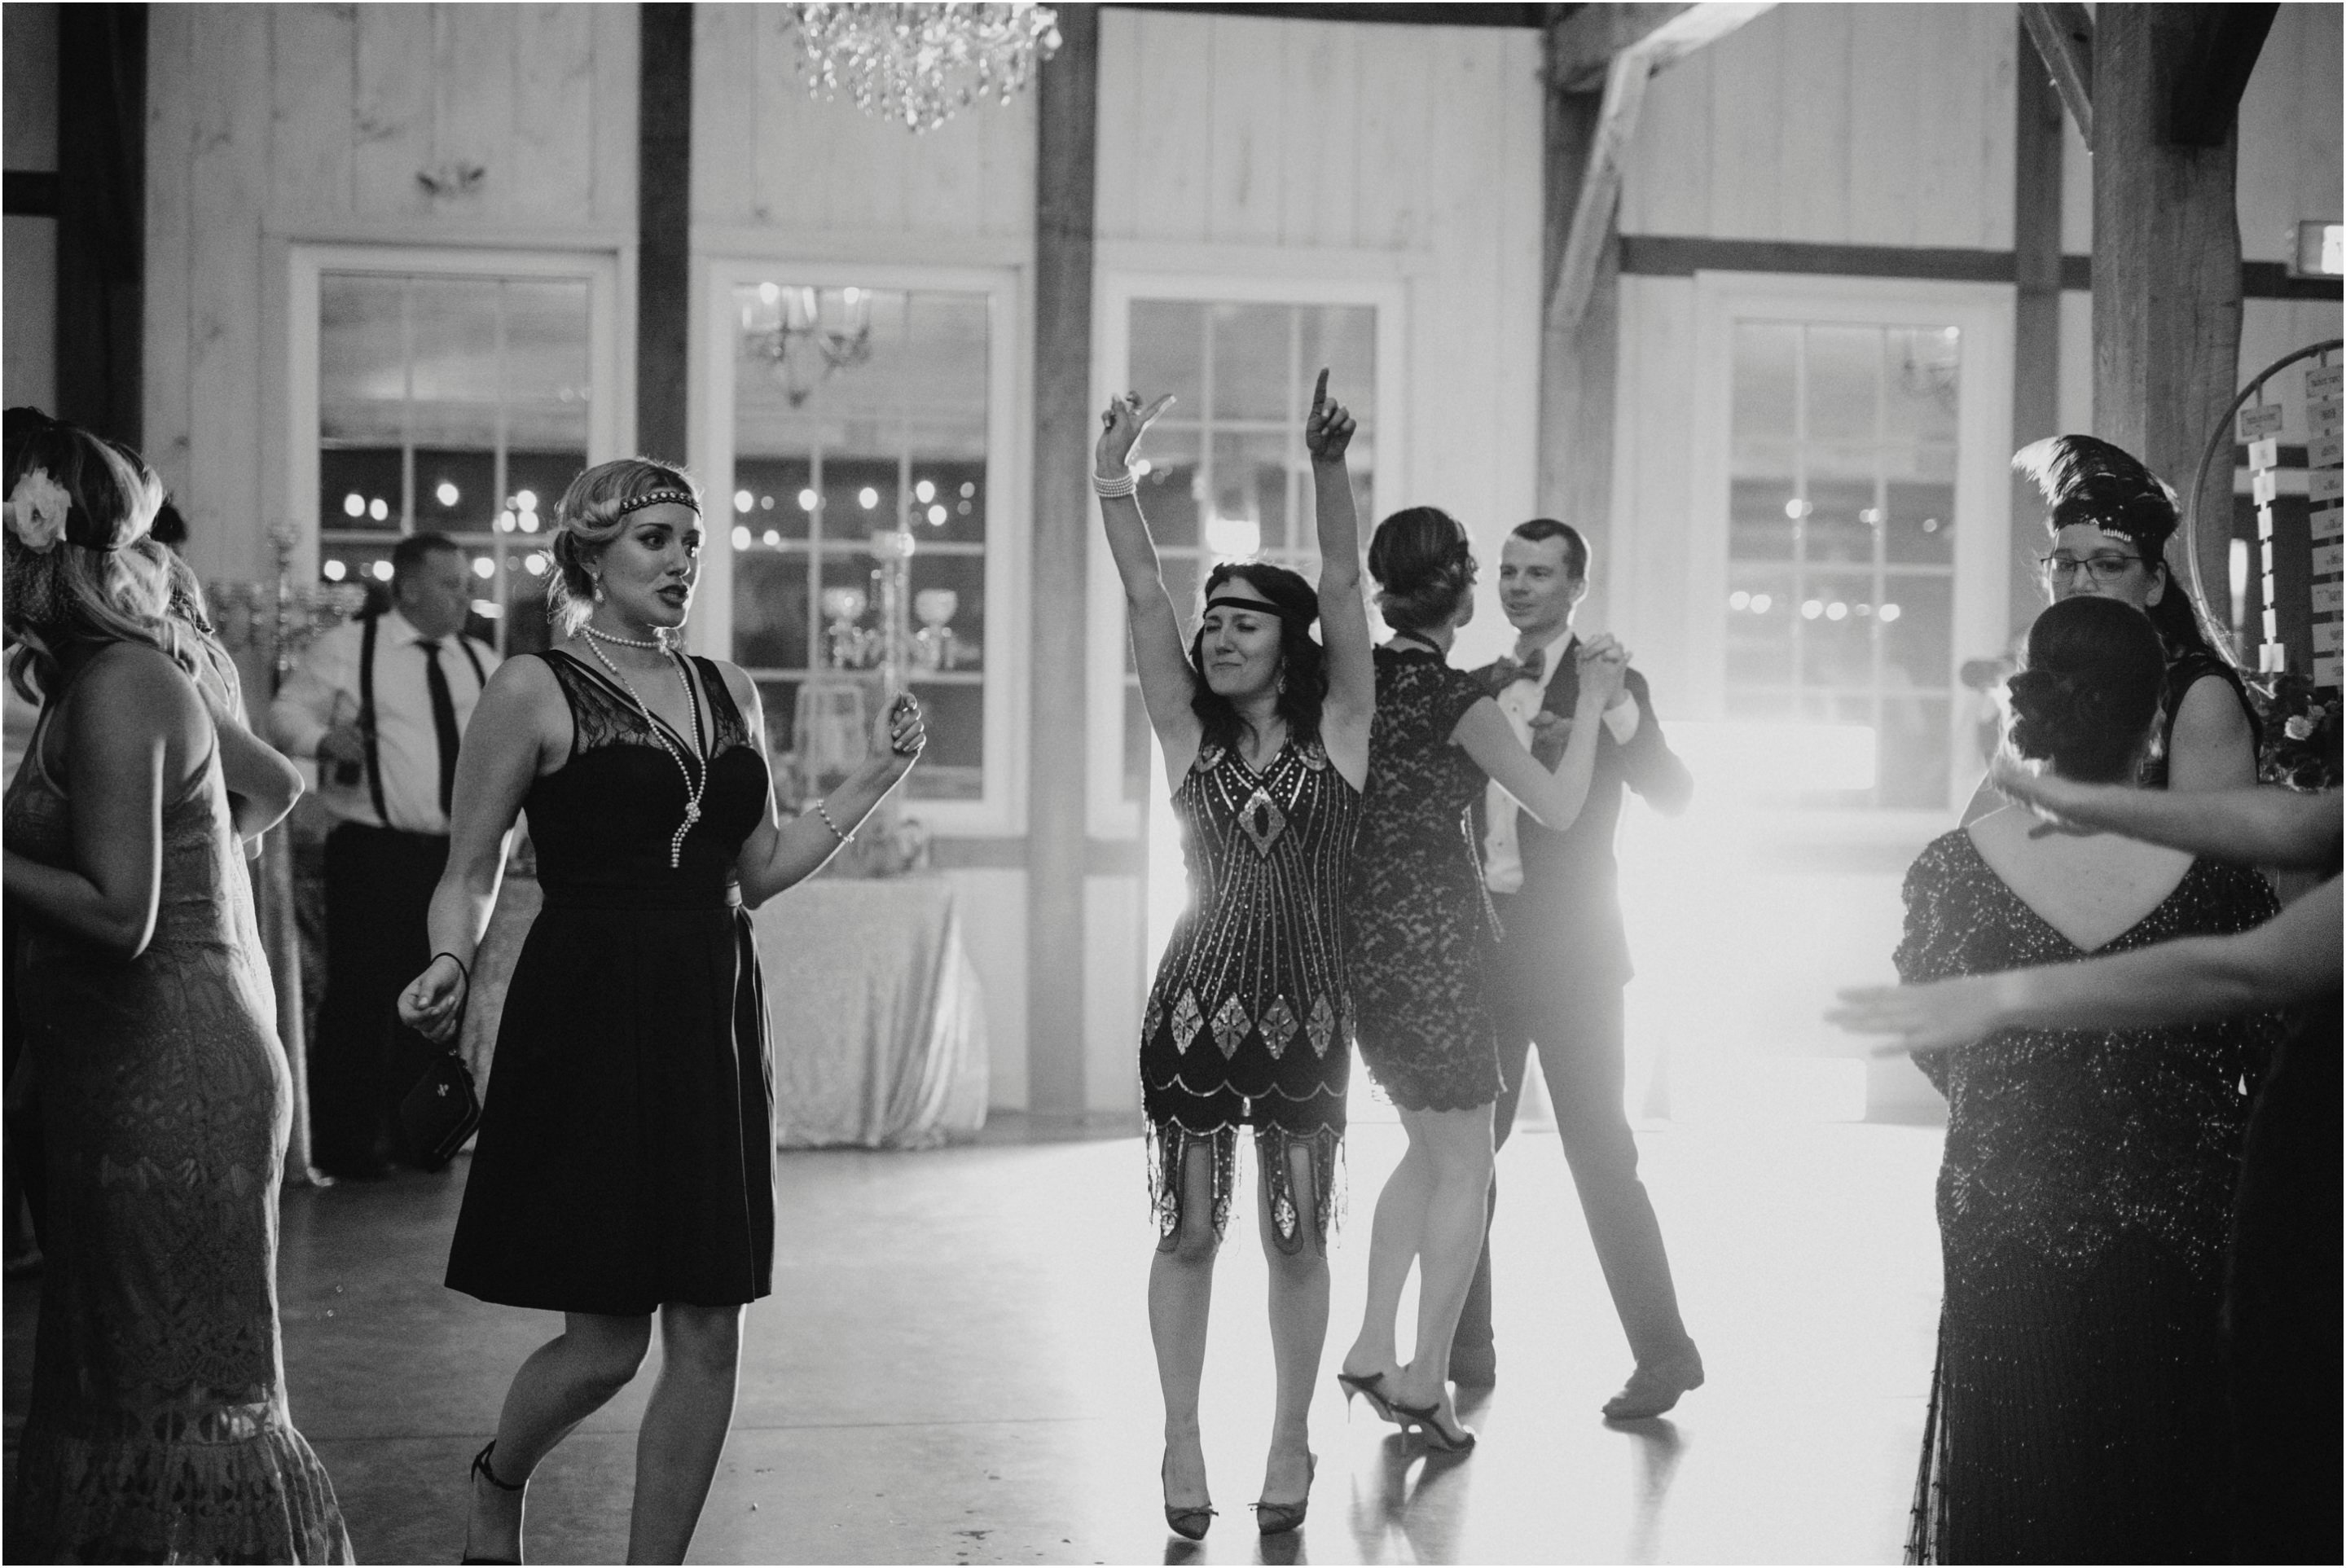 Stonefields Great Gatsby Wedding - Cindy Lottes Photography